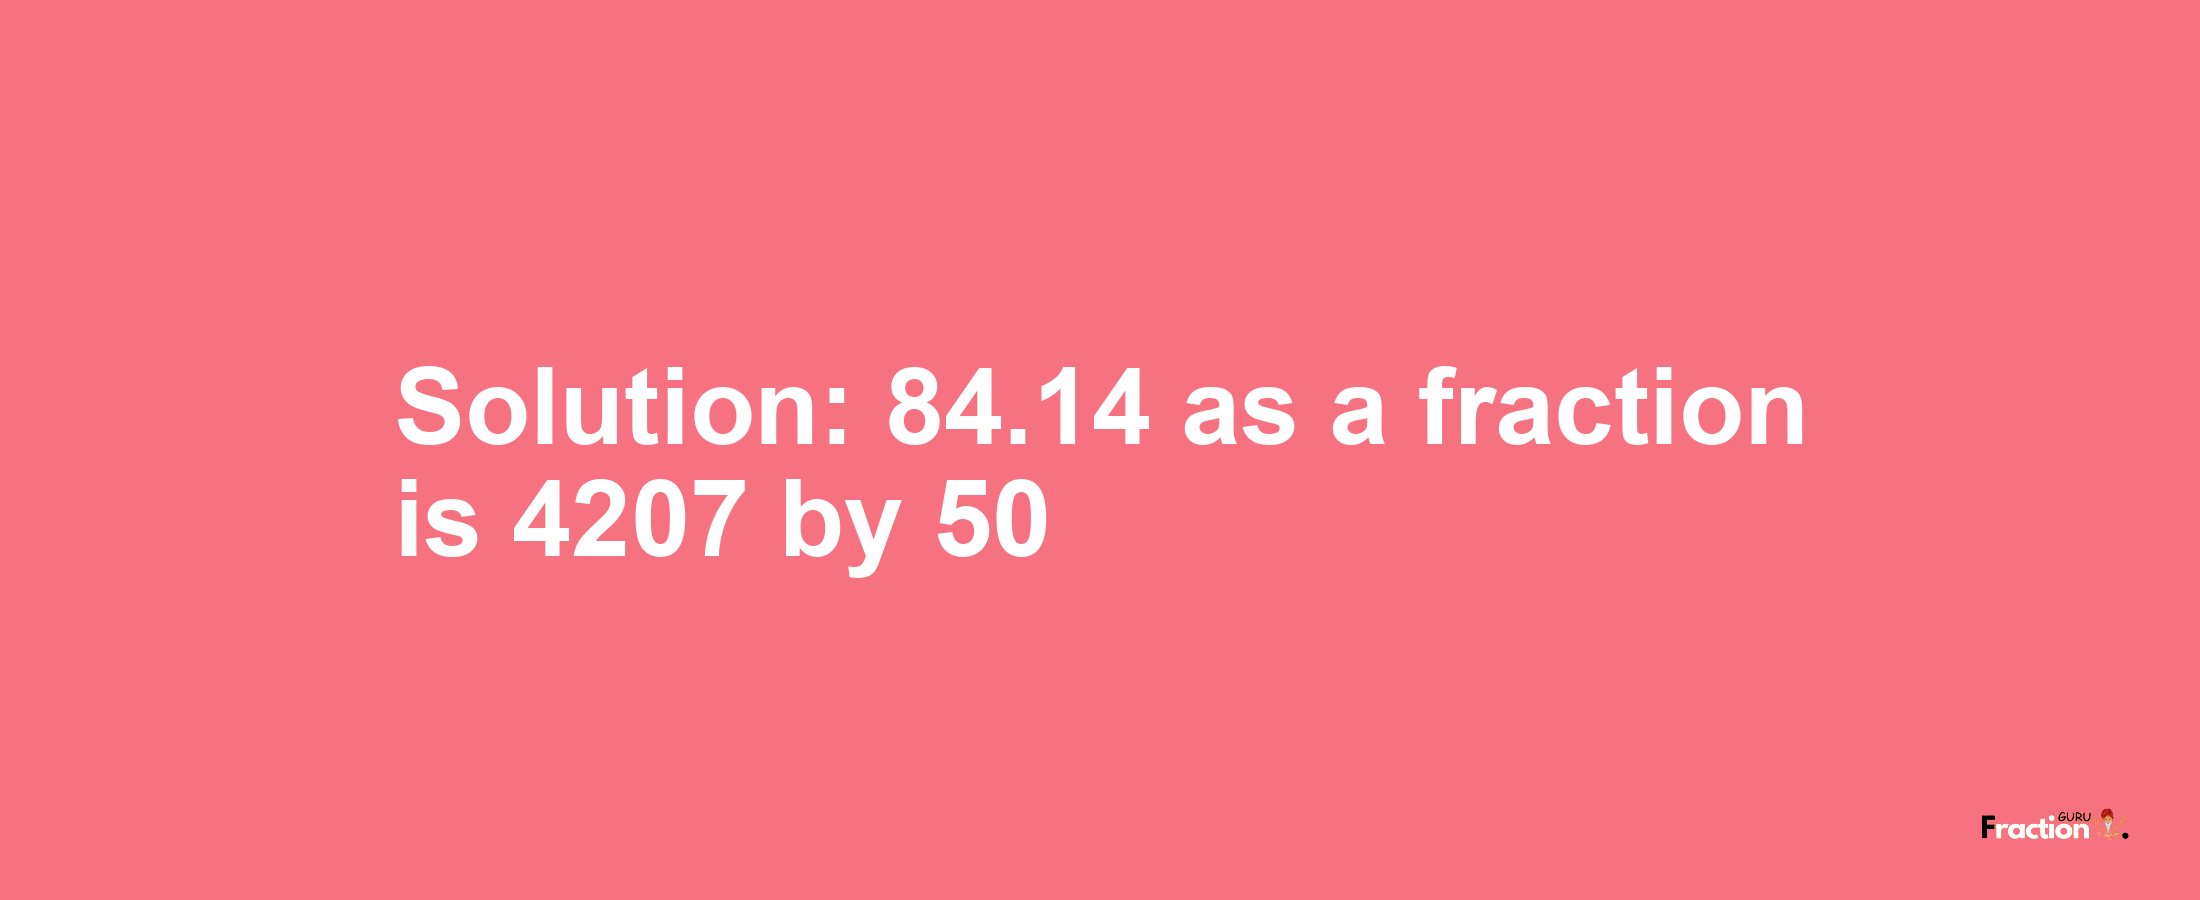 Solution:84.14 as a fraction is 4207/50